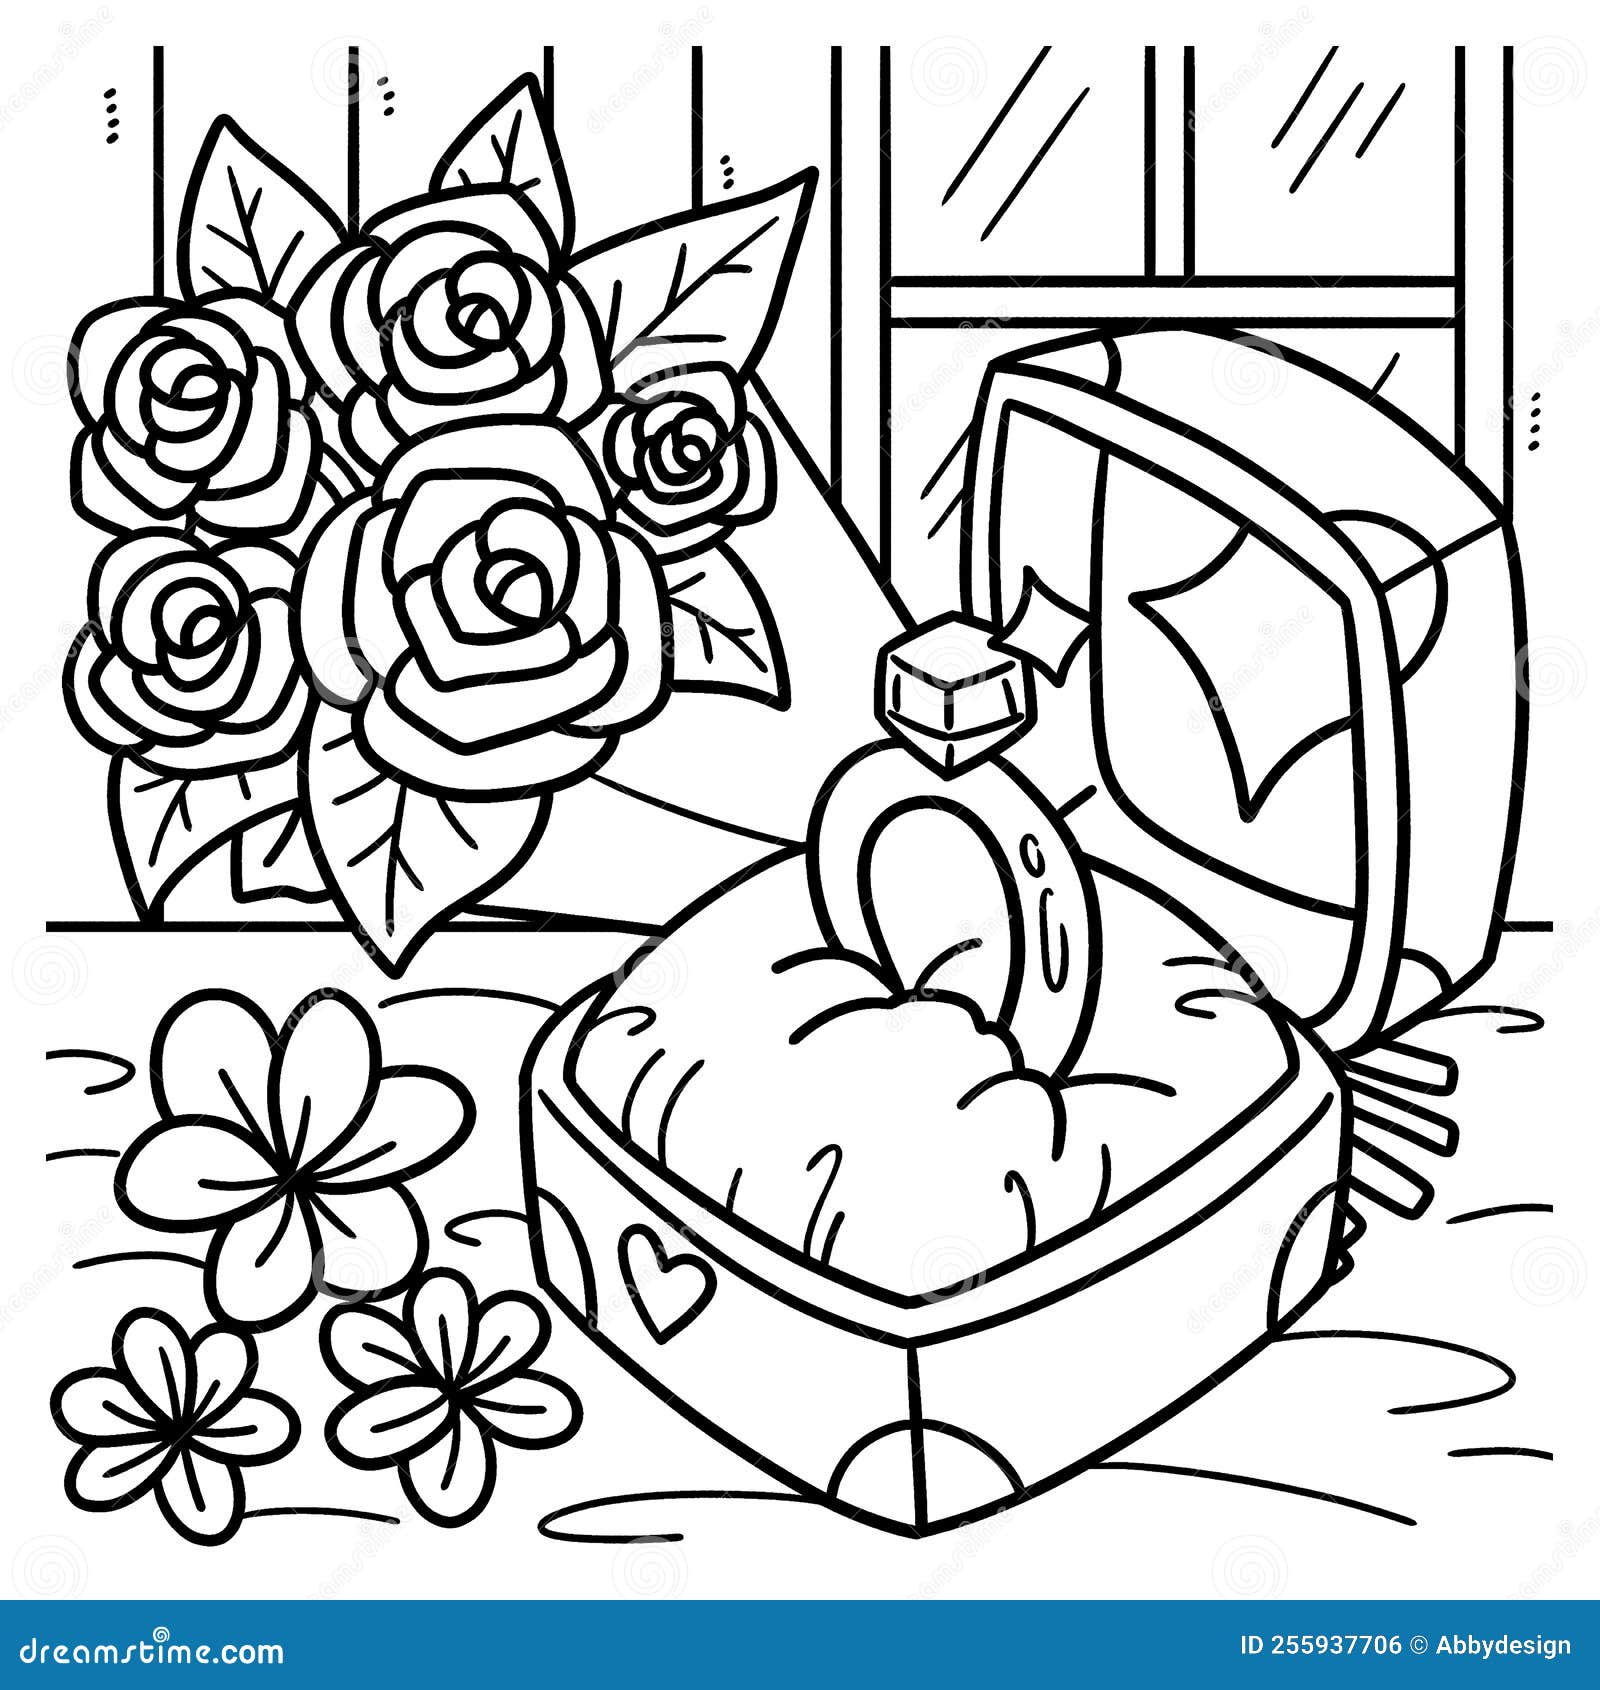 Ring Coloring Book Coloring Page Educate Stock Vector (Royalty Free)  1132062230 | Shutterstock